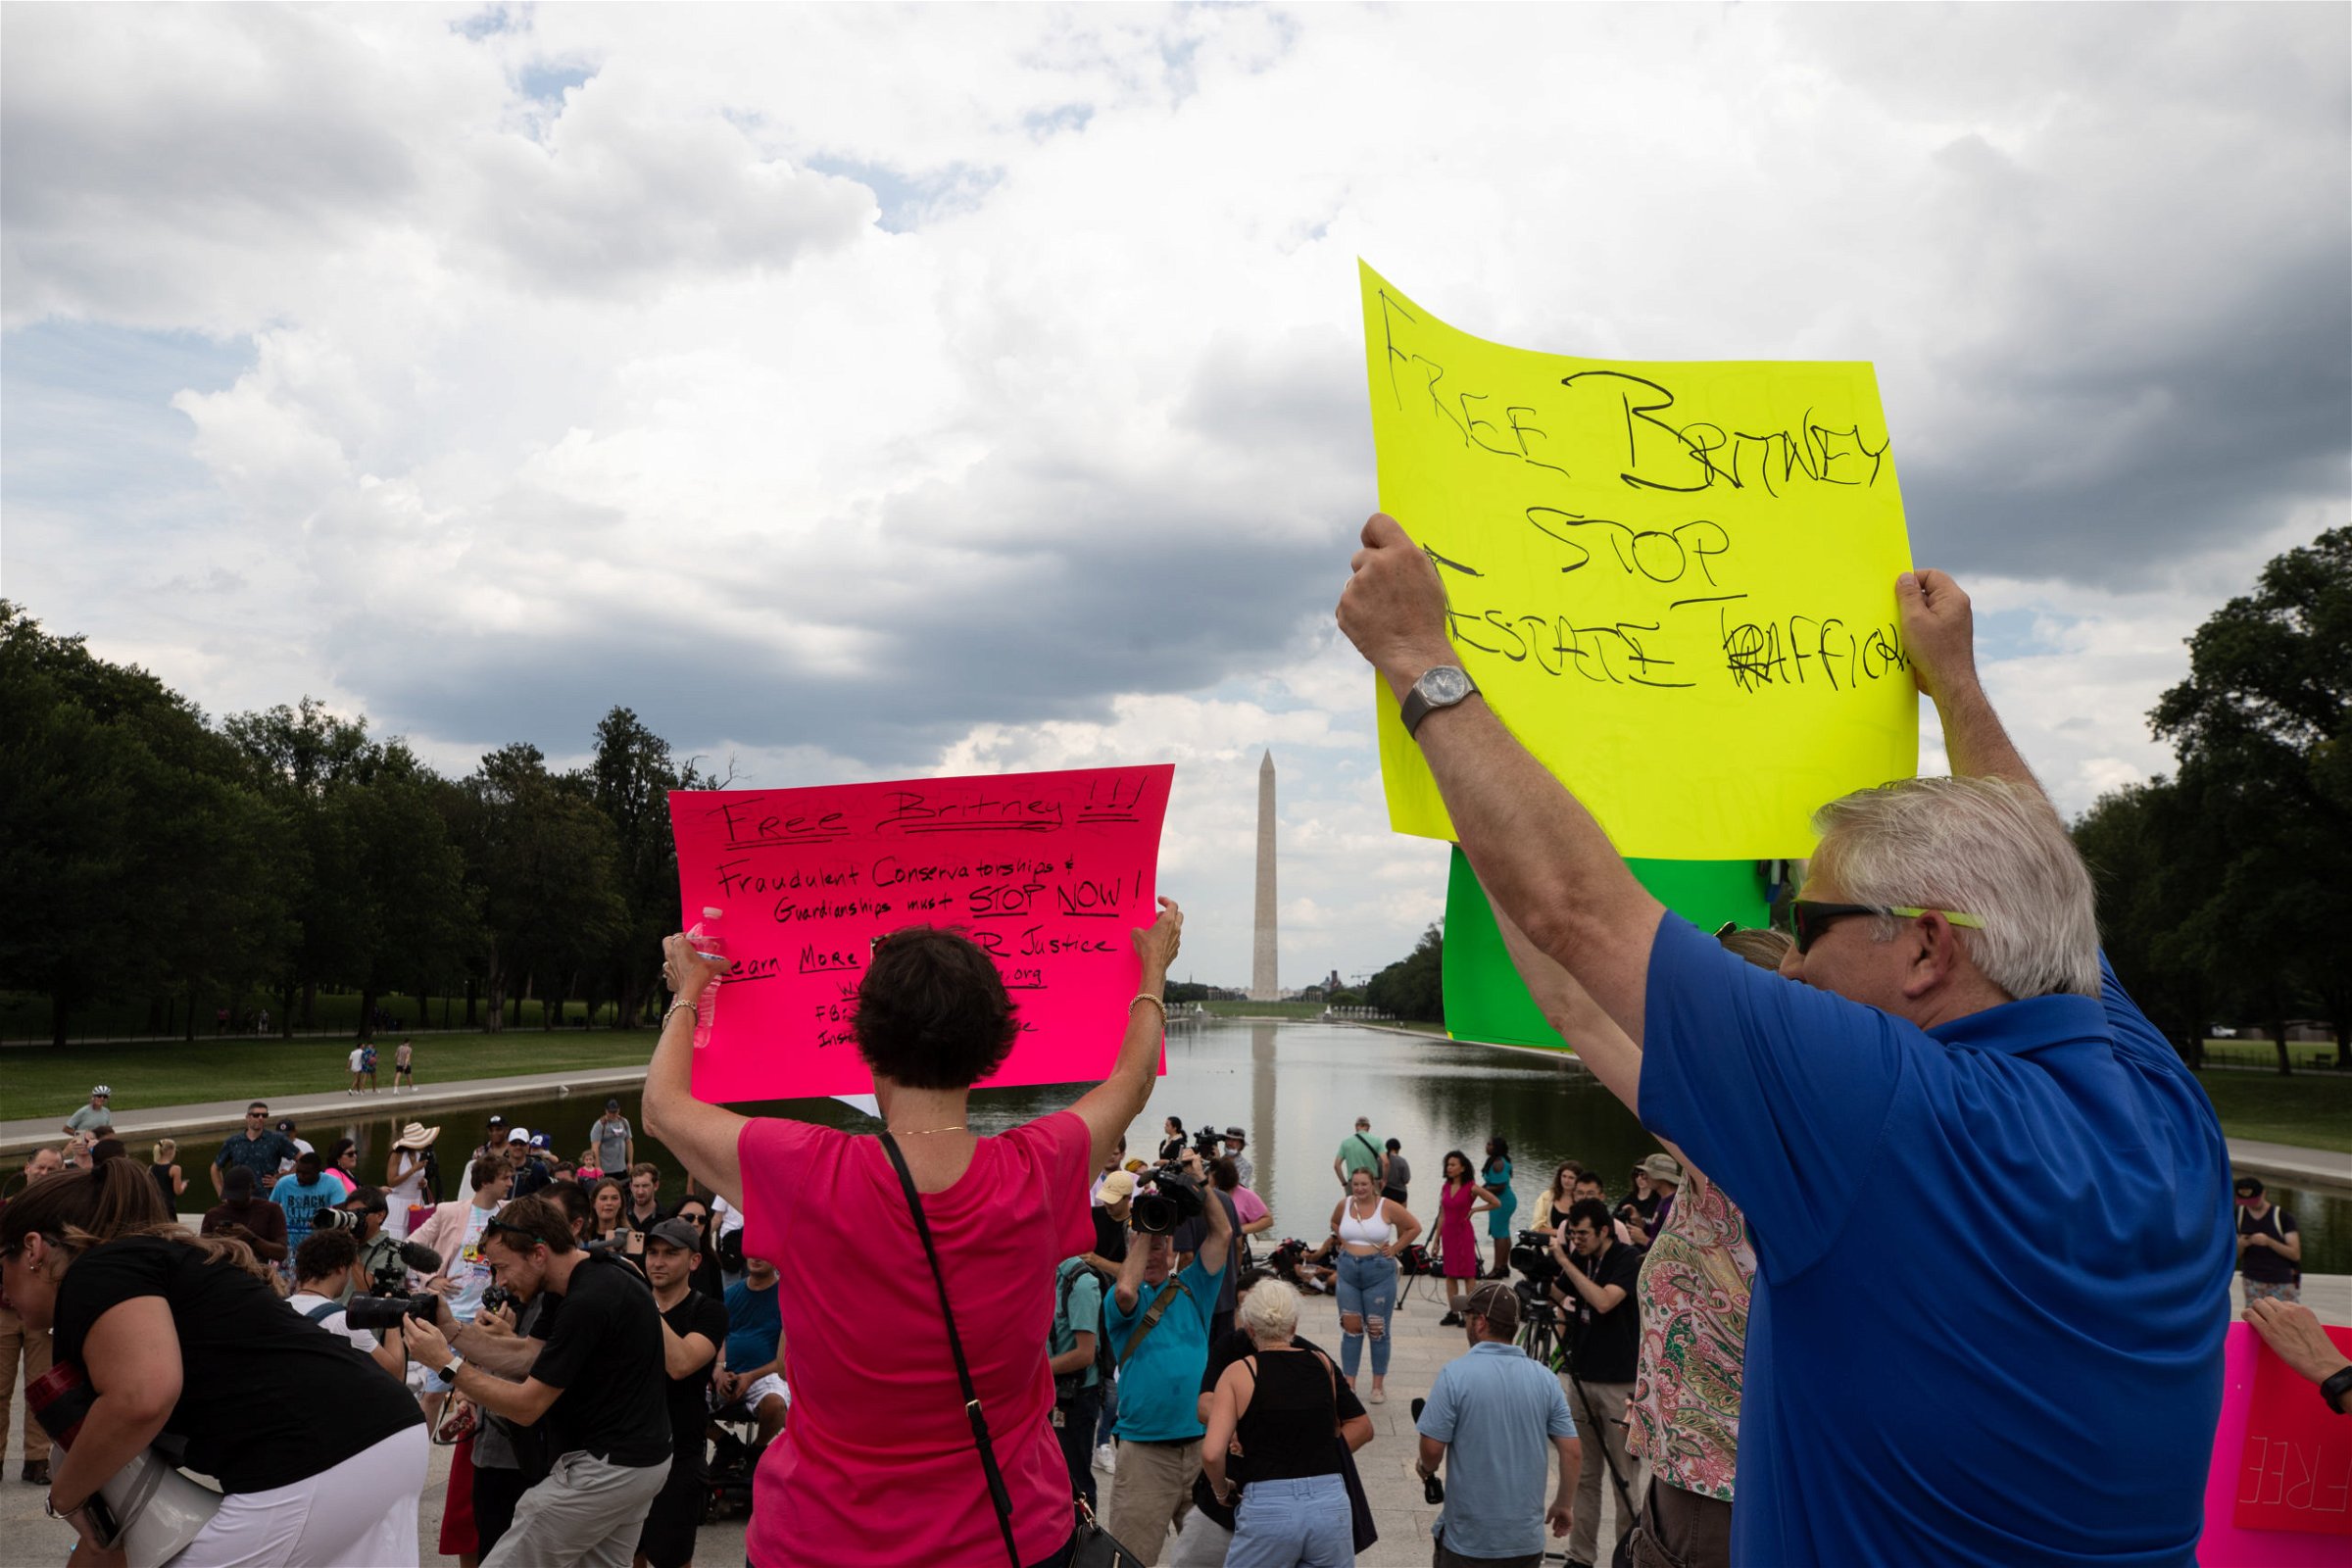 A crowd gathered for a "free Britany" rally to call attention to the pop star's battle over her conservatorship in Washington, D.C. on July 14, 2021. (Kaylee Greenlee- Daily Caller News Foundation)